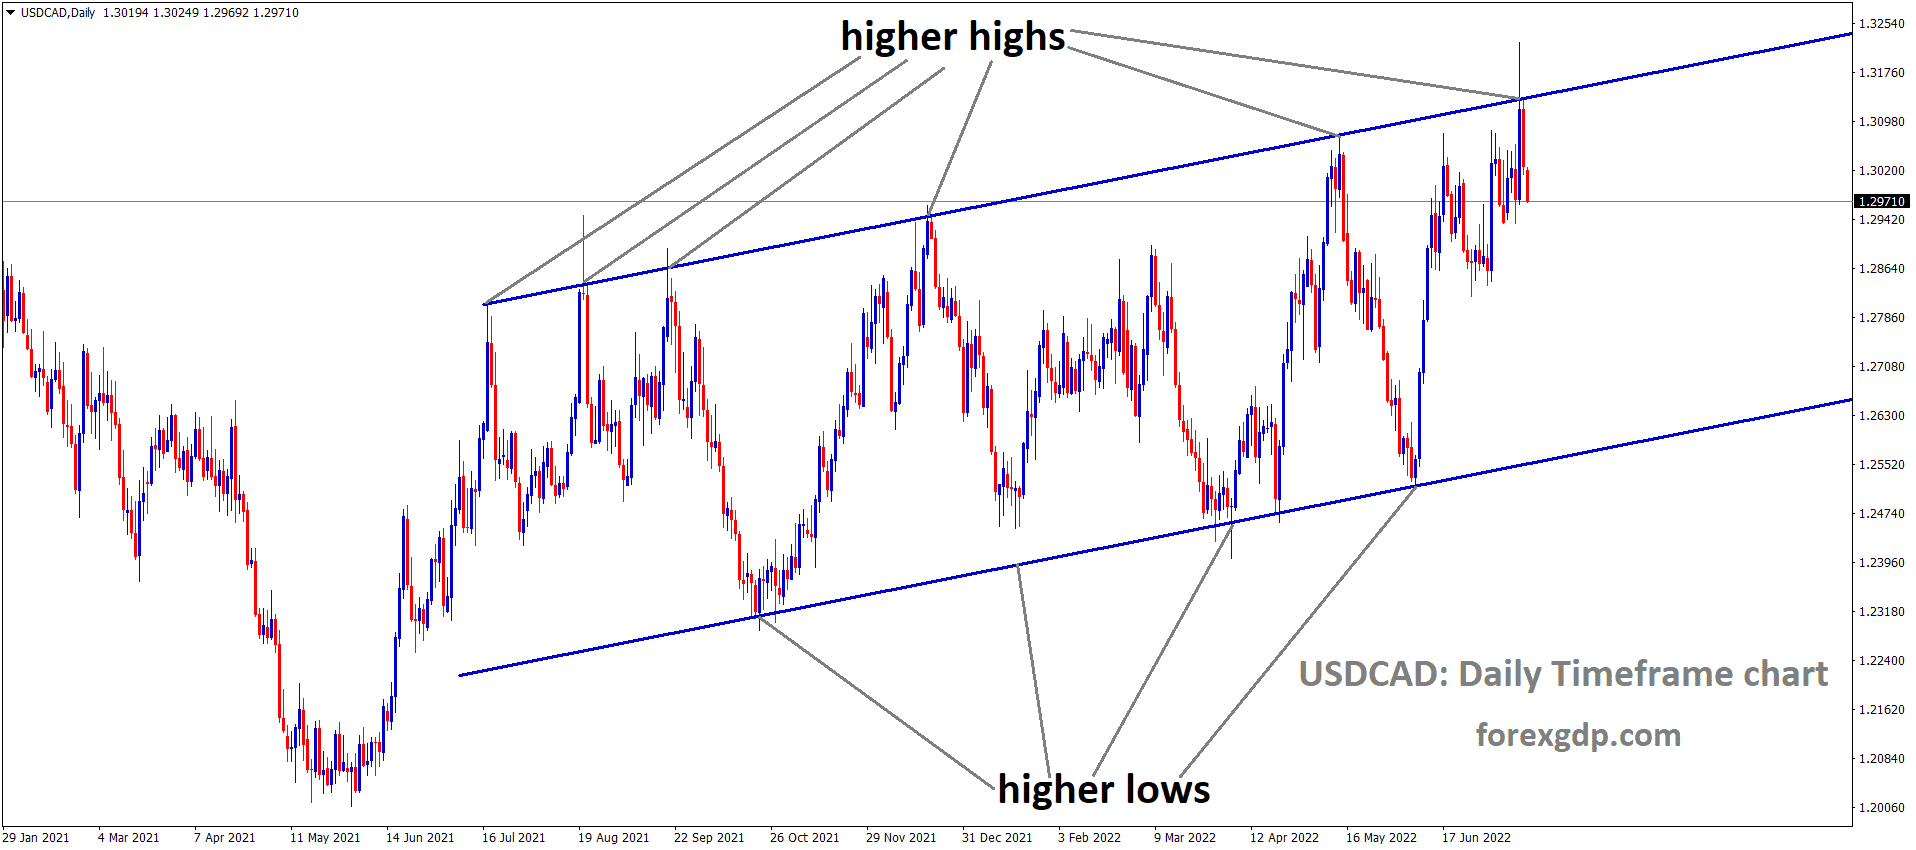 USDCAD is moving in an Ascending channel and the market has fallen from the higher high area of the channel 1